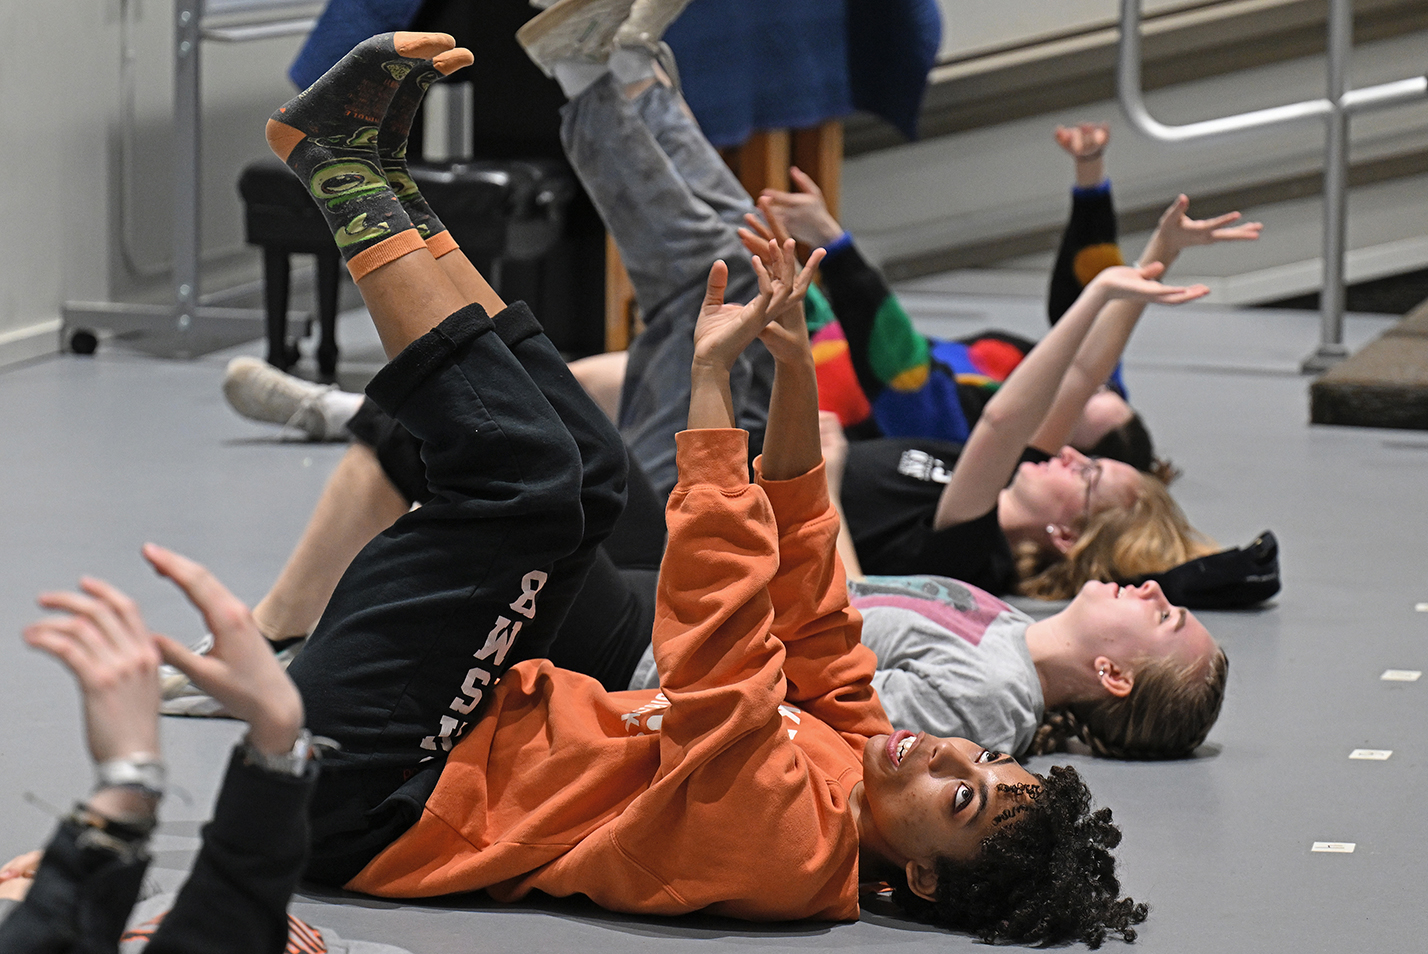 actors lay on floor with hands and feet in the air